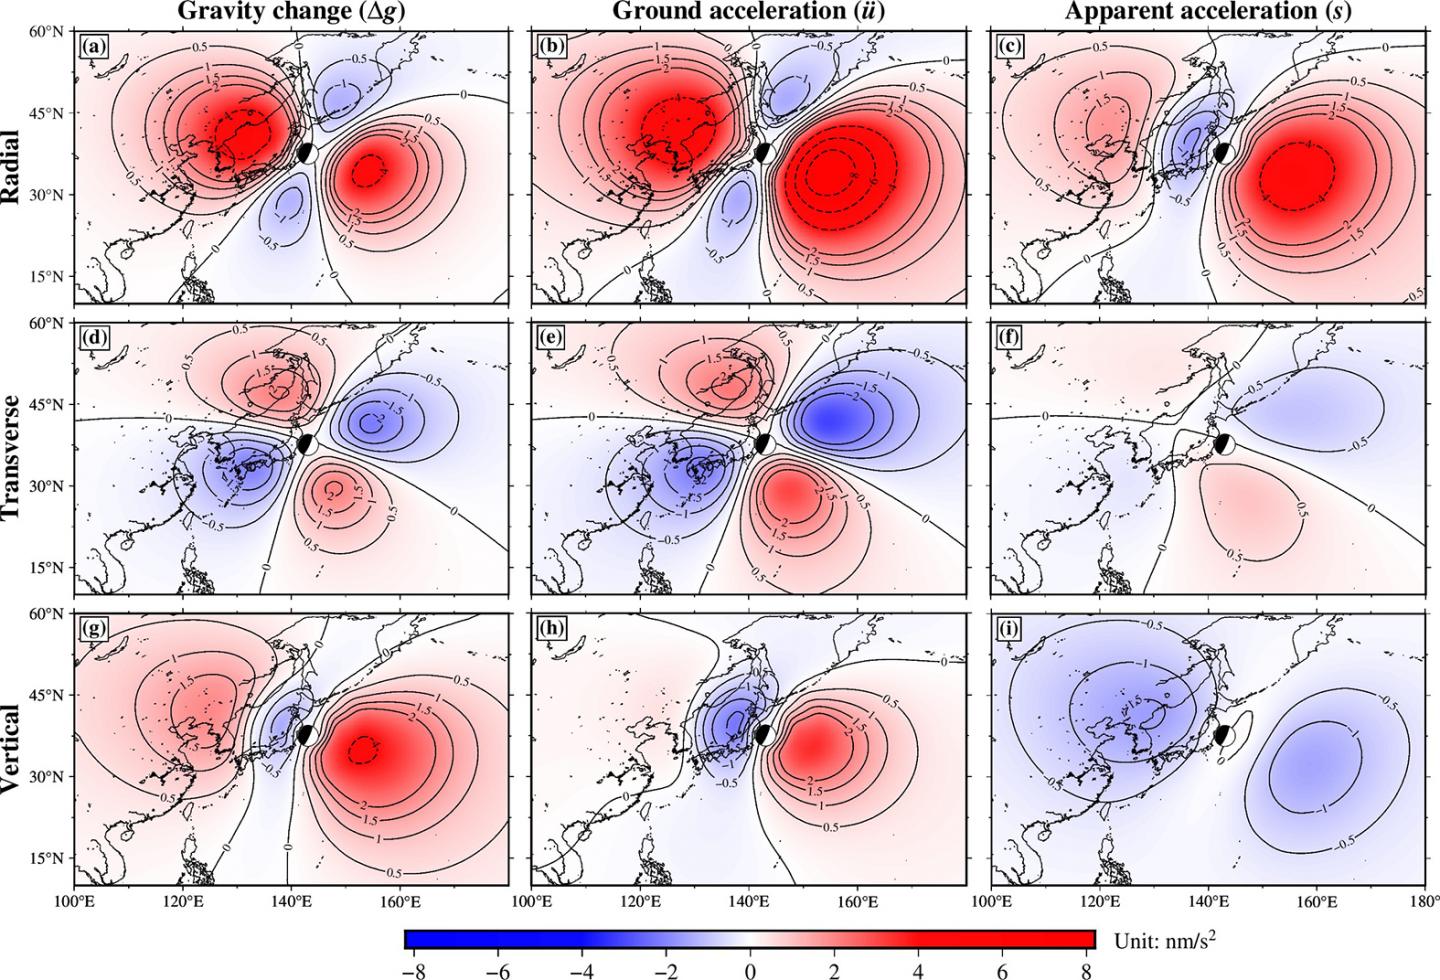 Spatial Distribution of PEGS Signal Strength during the Tohoku Quake in 2011